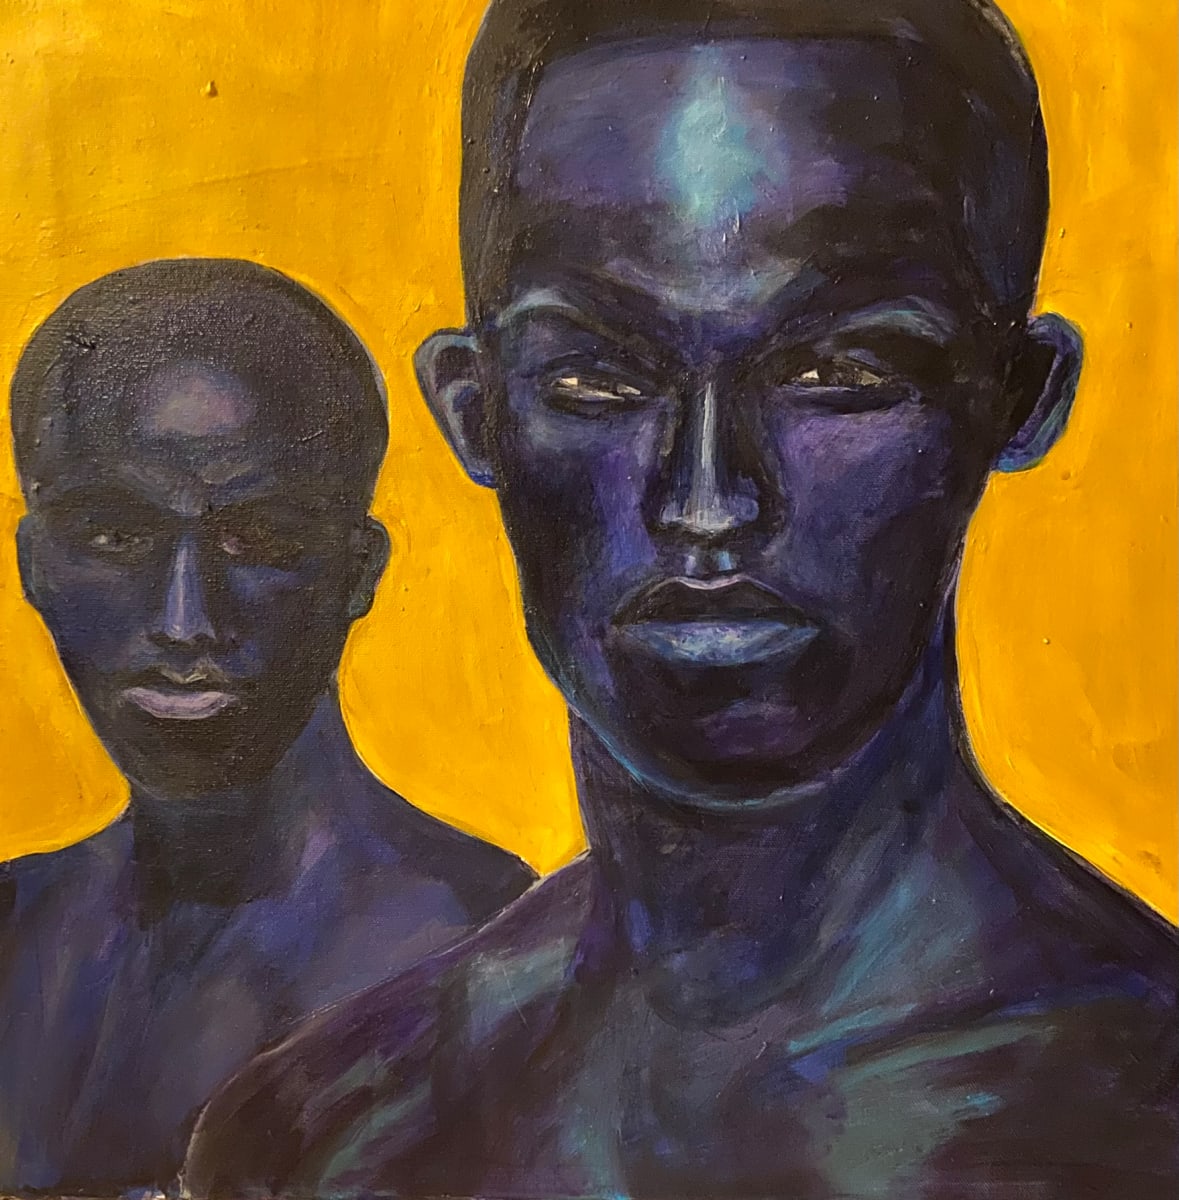 Brothers  Image: Boone, Cheryl, Brothers, 2020, Acrylic on Canvas, Chicago, Il